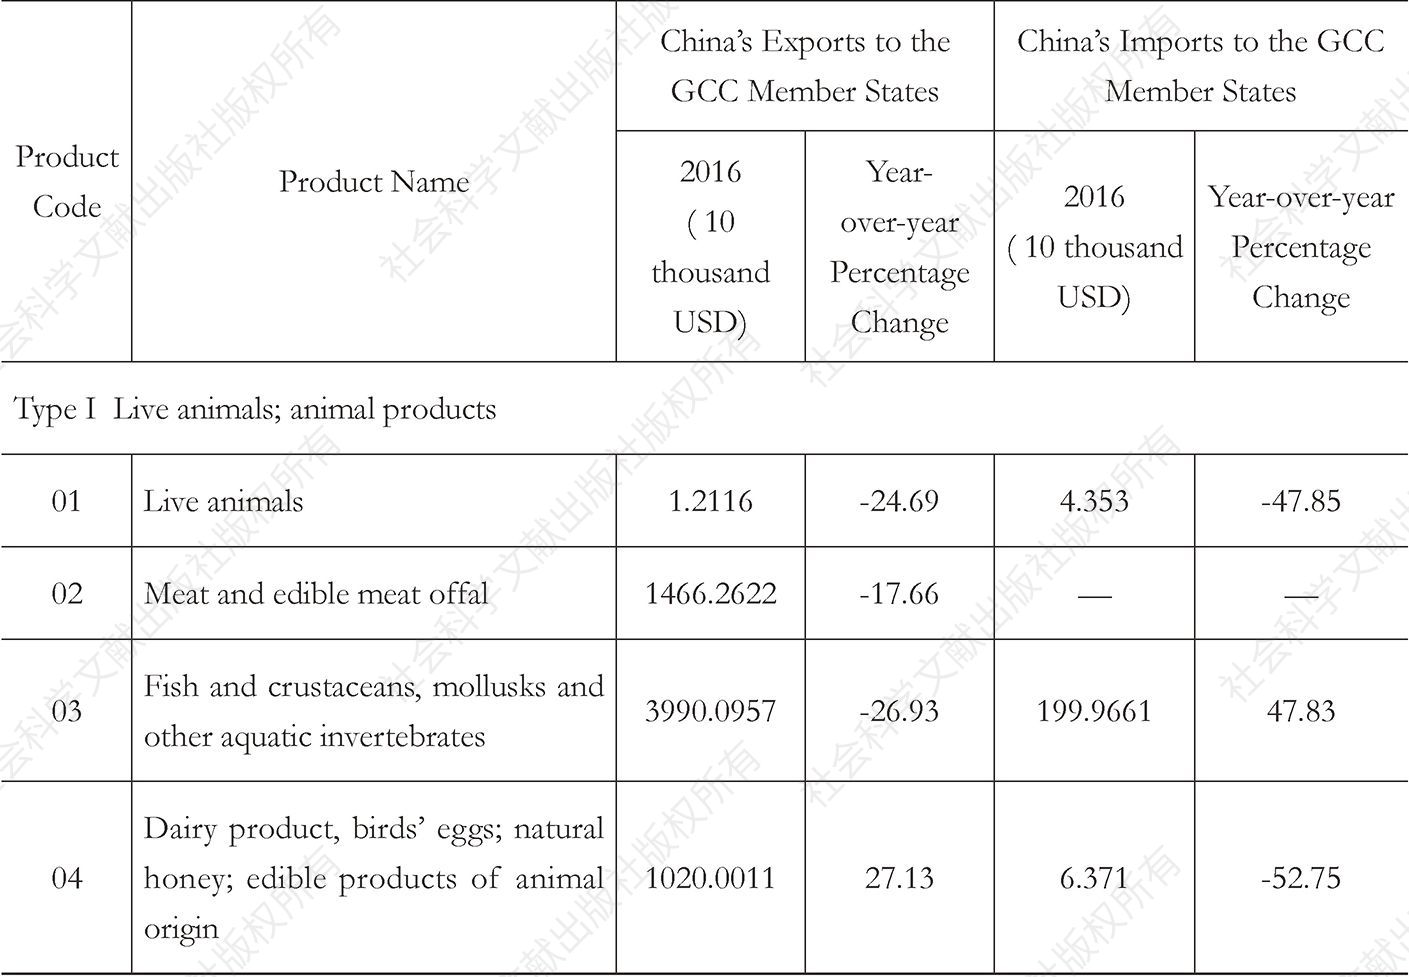 Table 6.6 China’s Export Structure of Agricultural Products and Foods in GCC (2016)